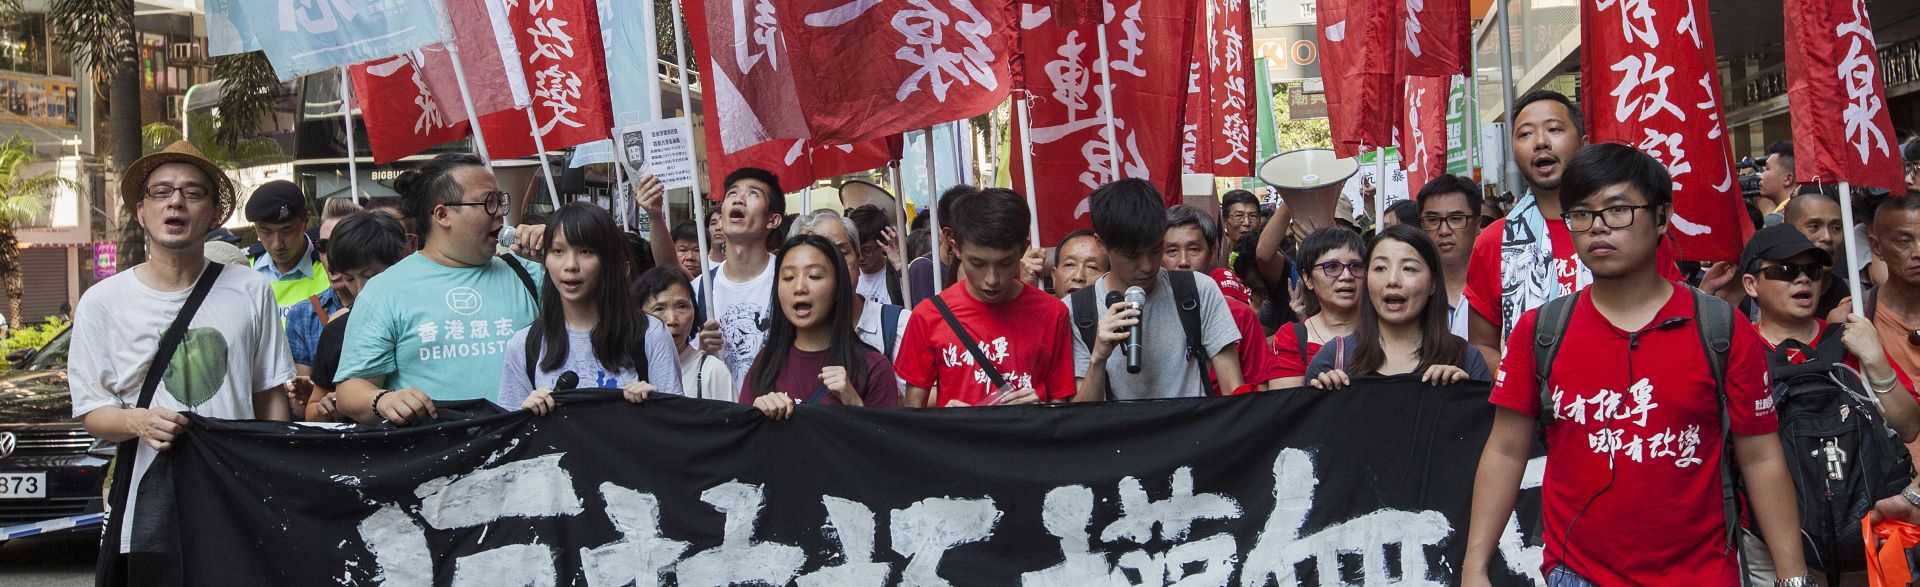 epa06152785 Students lead Hong Kong people with a Chinese banner that reads 'Protesting Authoritarianism is not a Crime' as they march through the streets in support of imprisoned student political activists Joshua Wong, Nathan Law and Alex Chow, Hong Kong, China, 20 August 2017. On 17 August the Court of Appeal sentenced Joshua Wong, Alex Chow Yong-kang and Nathan Law Kwun-chung to six, seven and eight months in jail respectively for unlawful assembly on the first day of the Occupy Central Umbrella Movement when they stormed the Civic Square outside the Hong Kong government headquarters on September 2014.  EPA/ALEX HOFFORD